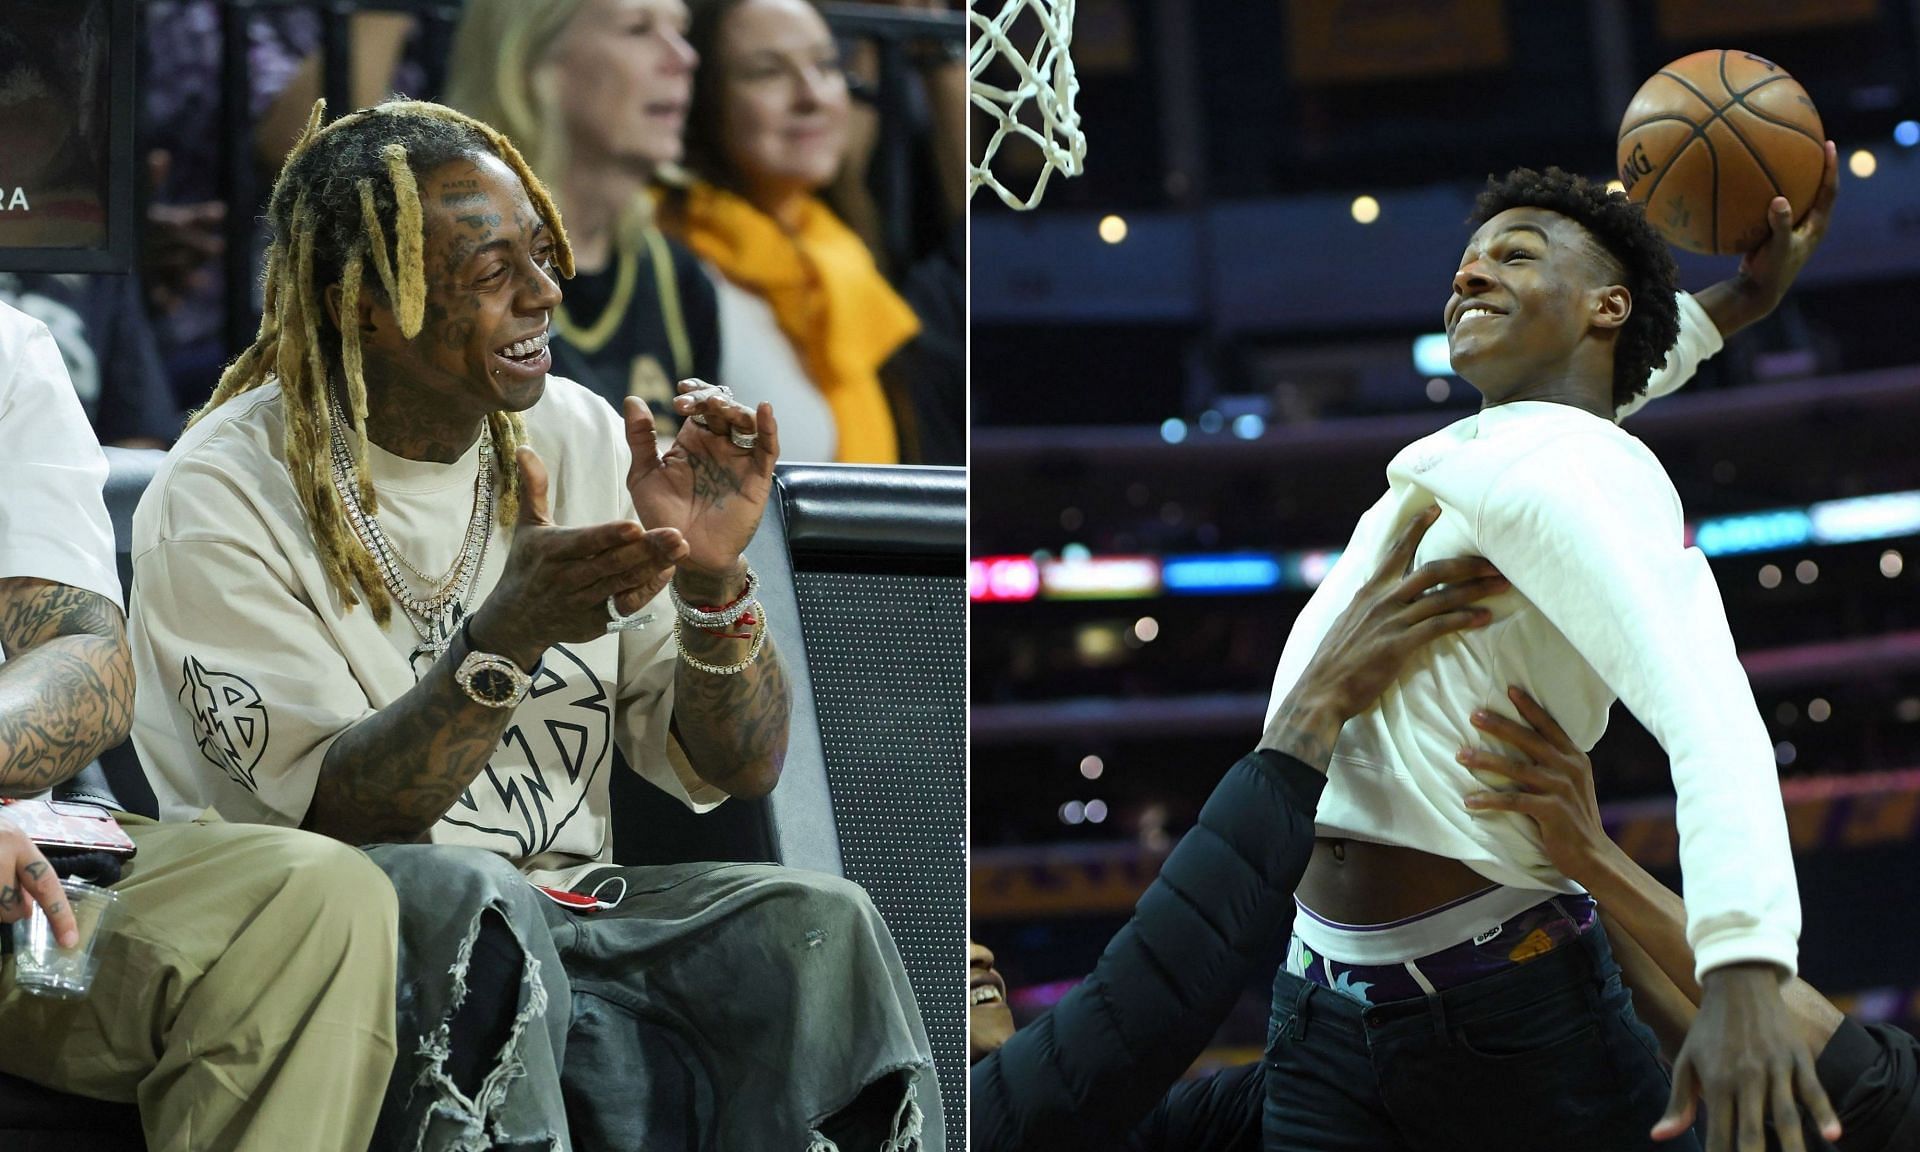 Lil Wayne effuses excitement at the prospect of a potential NBA collaboration between LeBron and Bronny James.